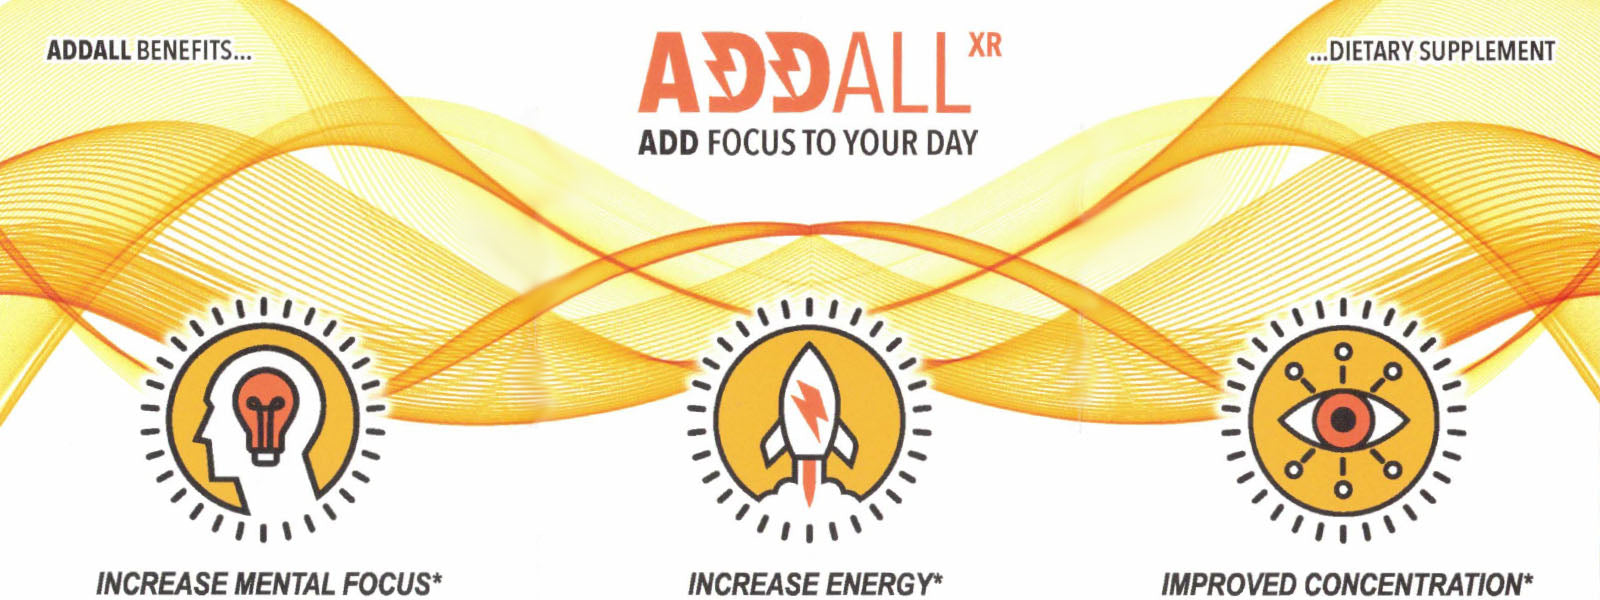 Addall - Add Focus To Your Day - Best Price Online at Marketplace Vape